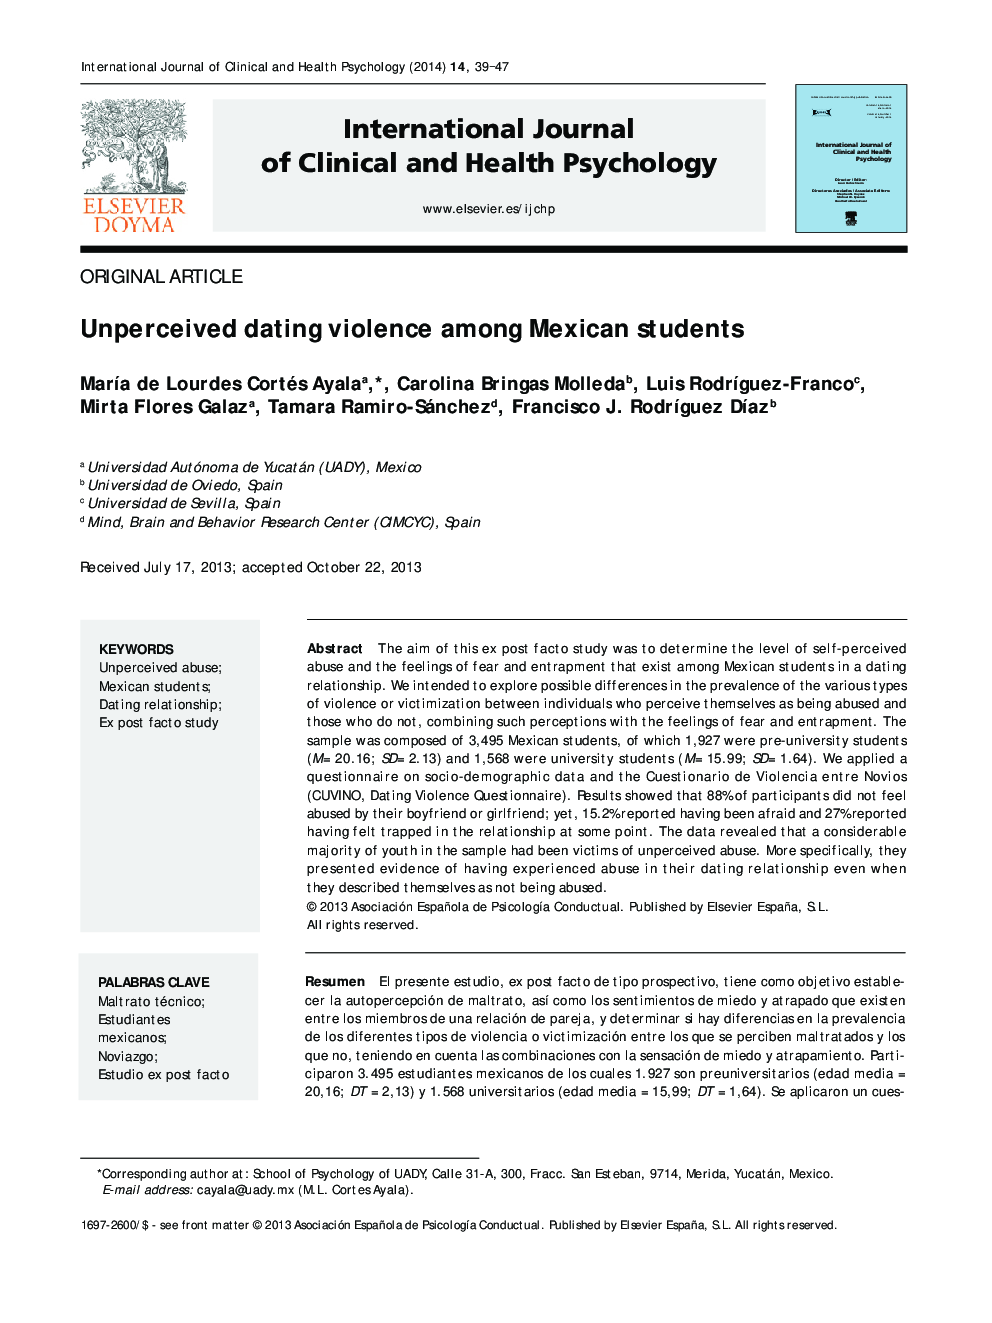 Unperceived dating violence among Mexican students